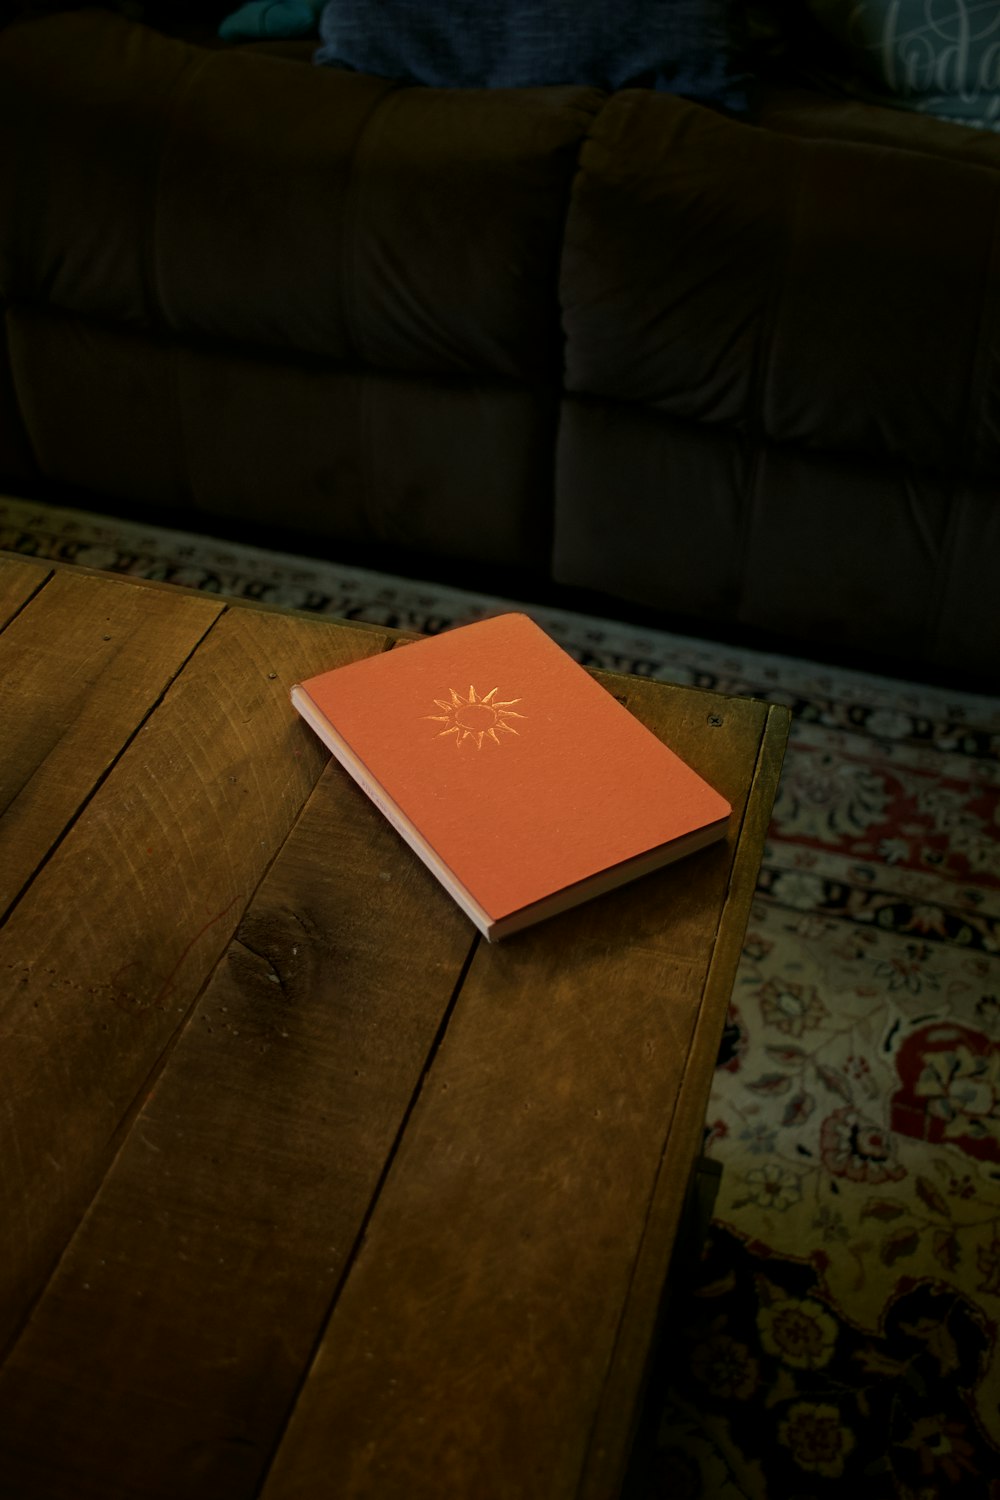 red and white book on brown wooden table